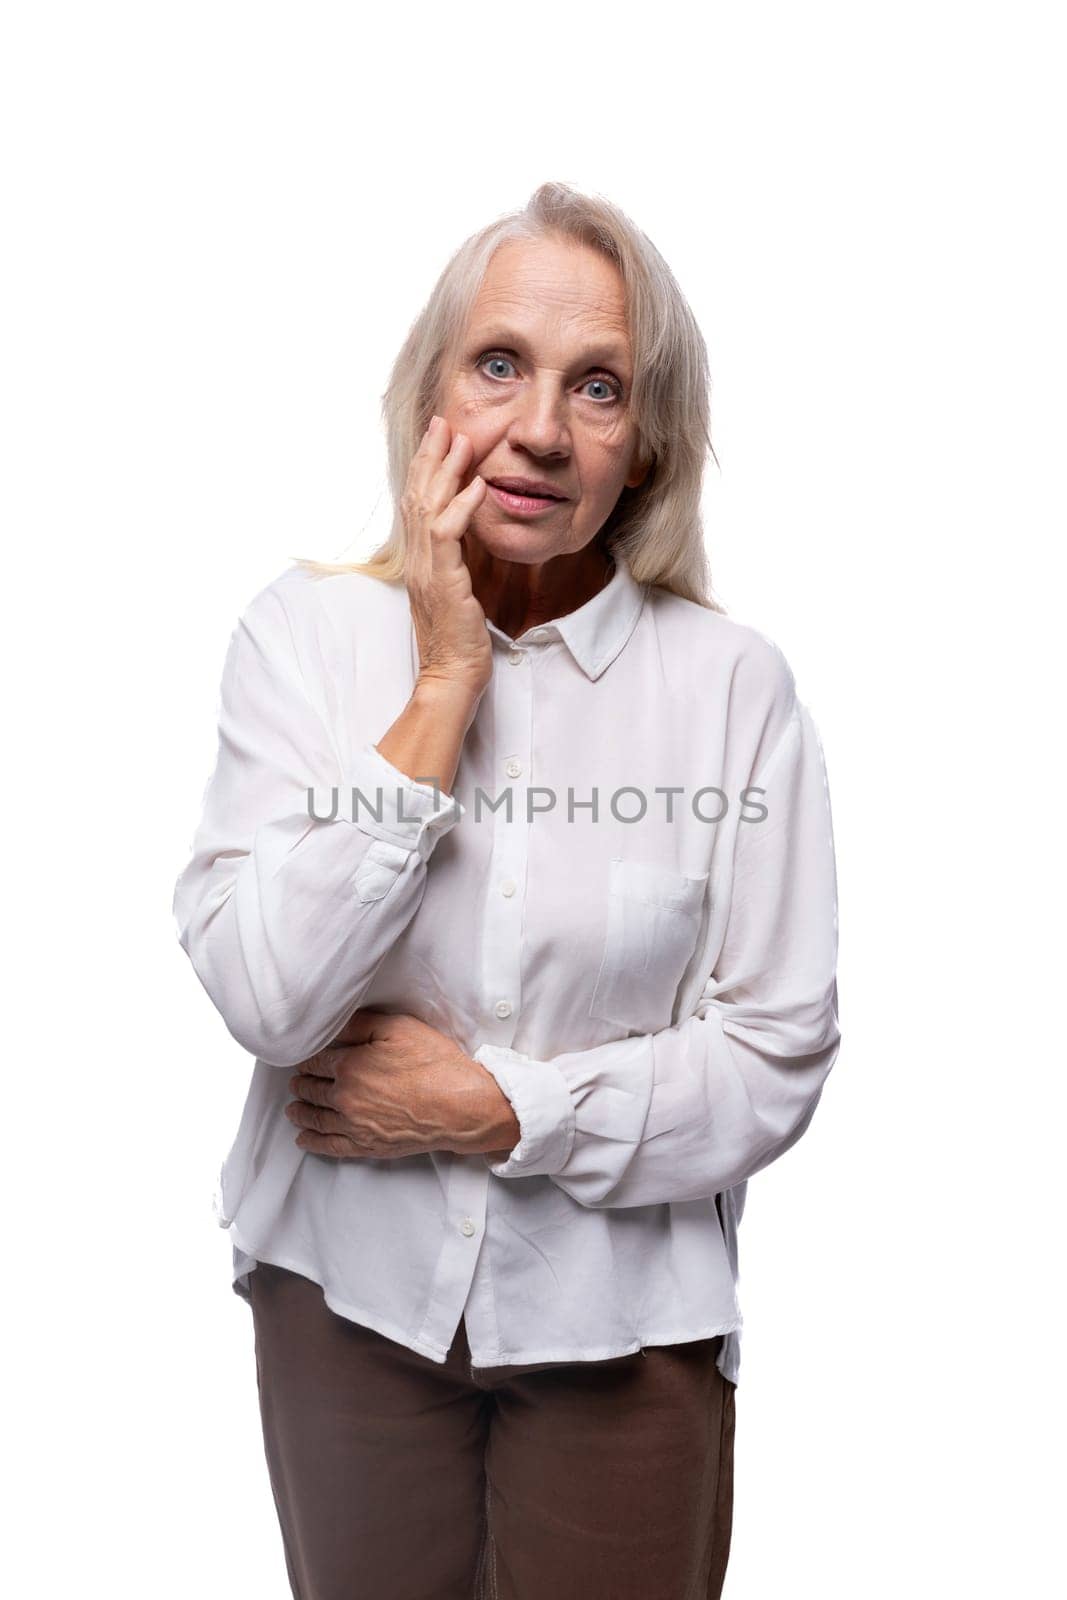 Pensioner woman with gray hair feels suspicious looking at camera by TRMK